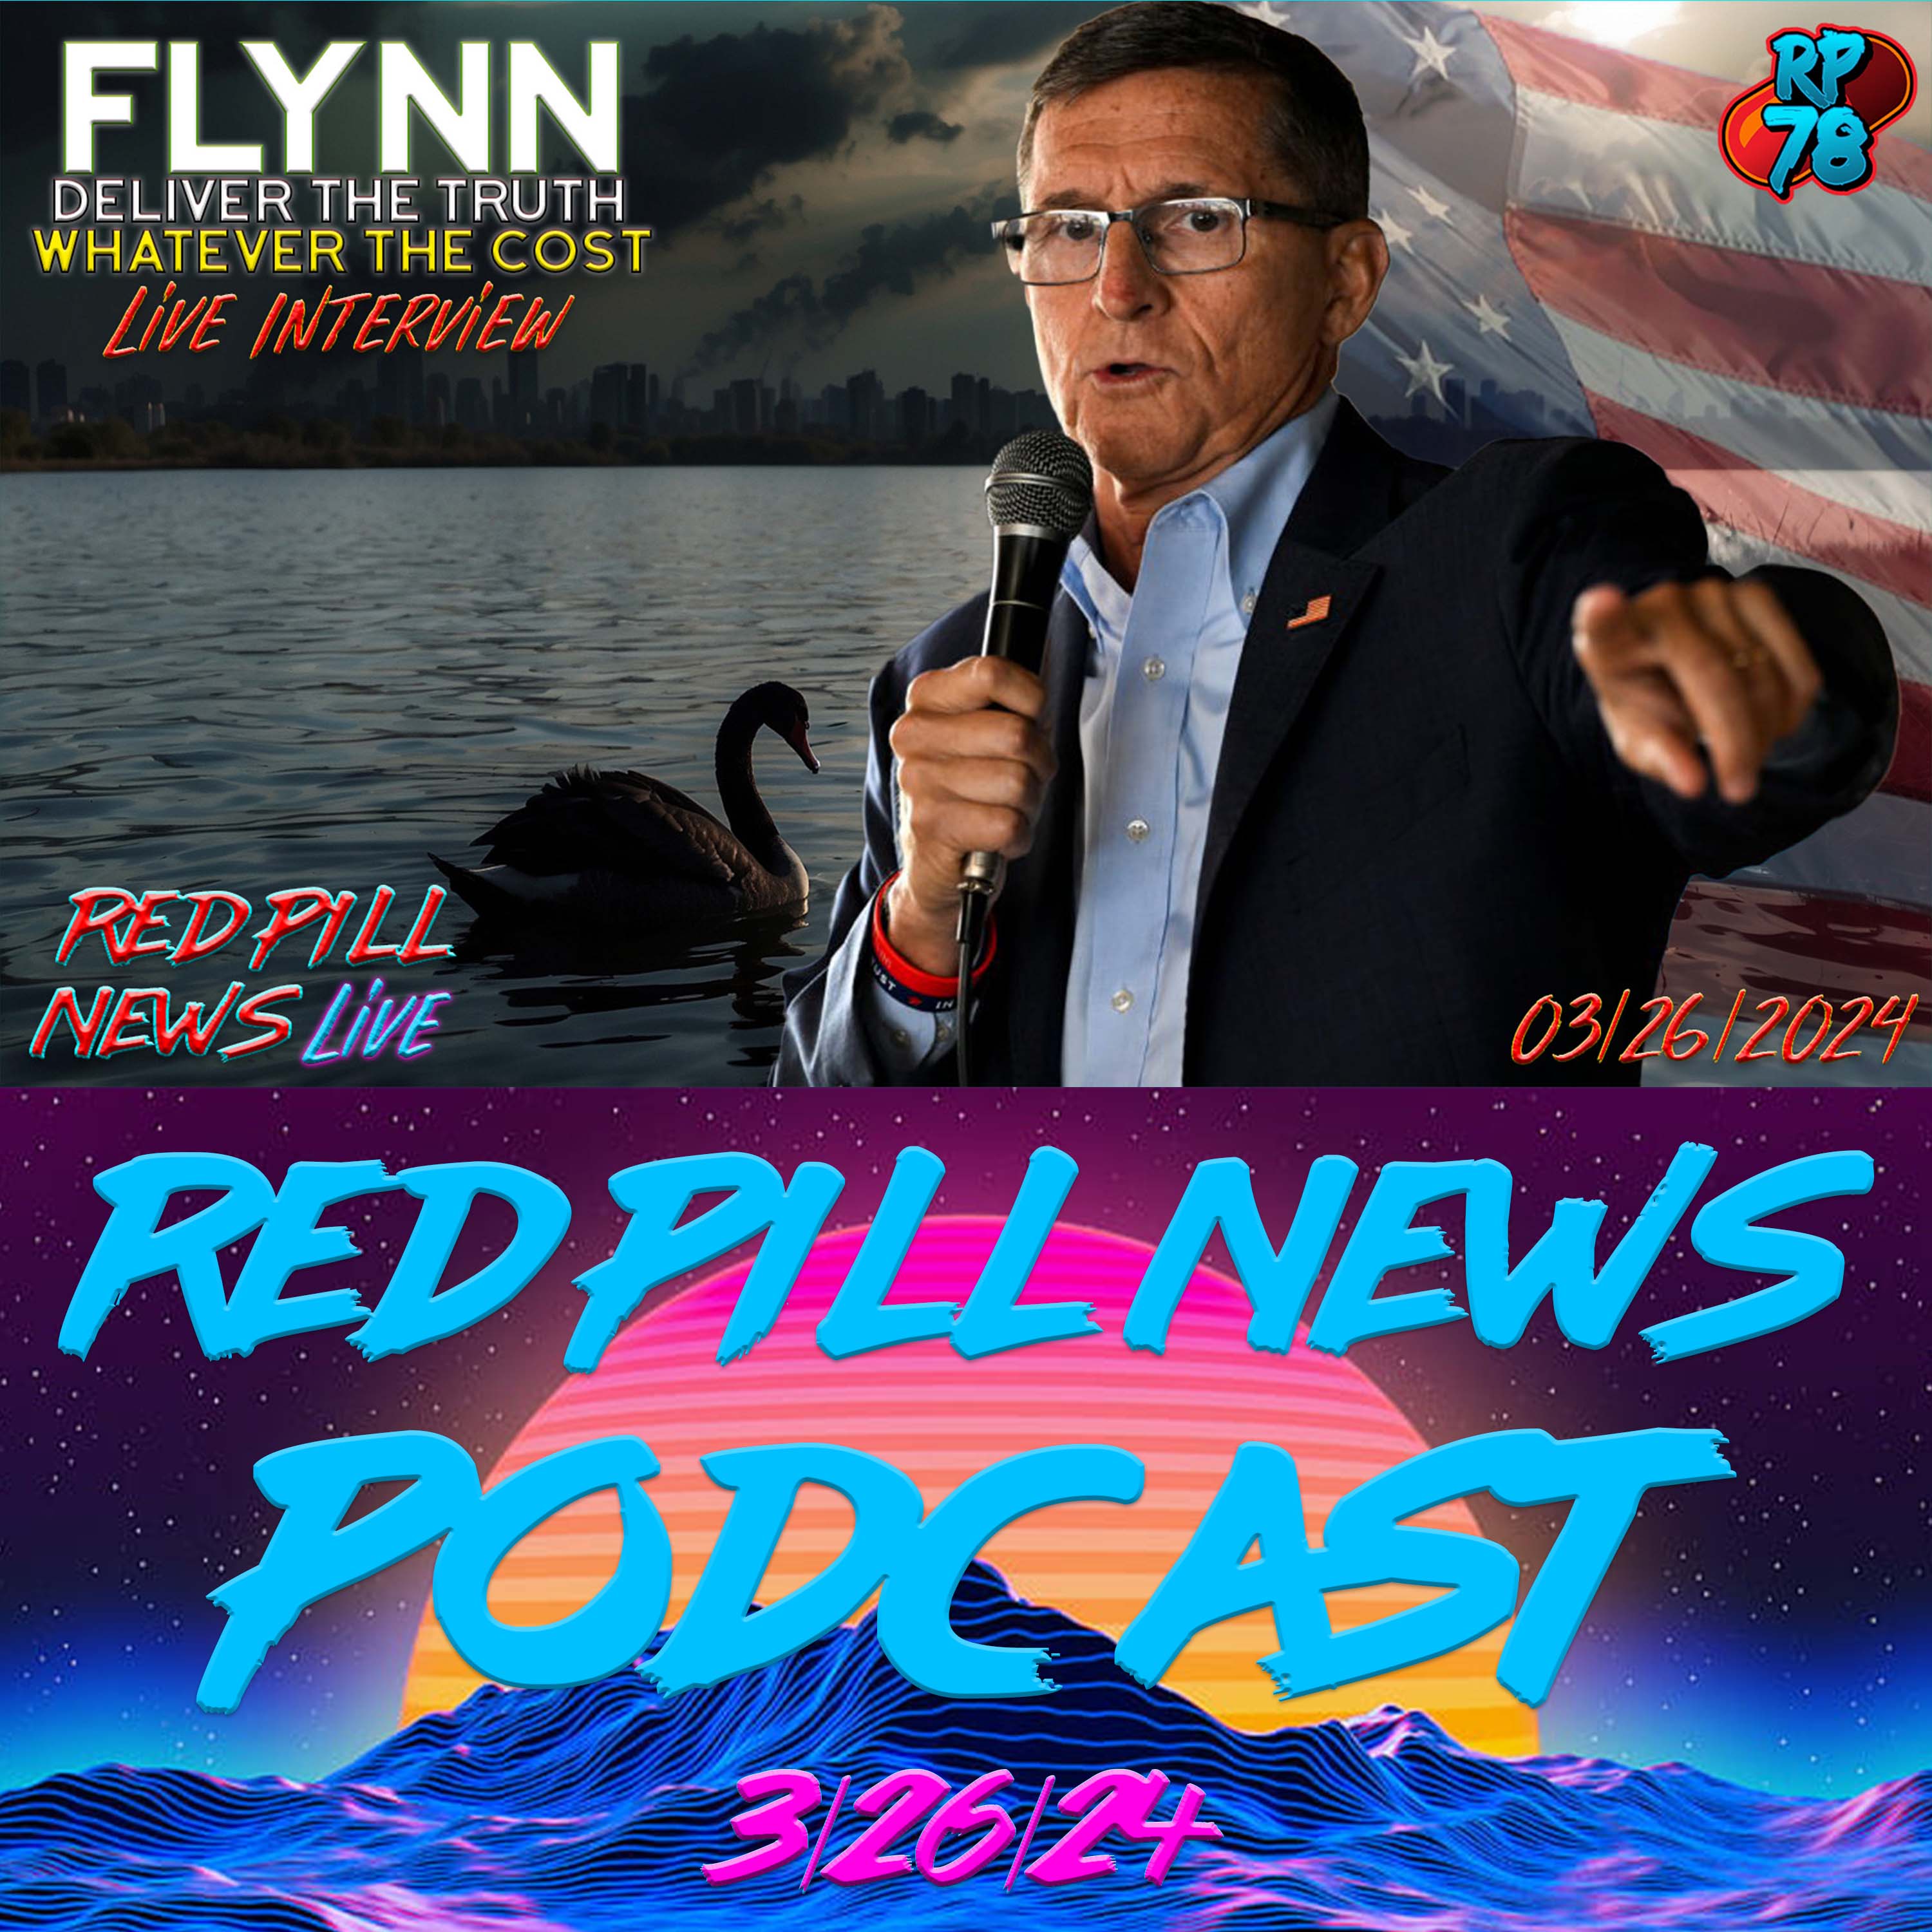 Whatever The Cost - Gen. Michael Flynn joins Red Pill News Live